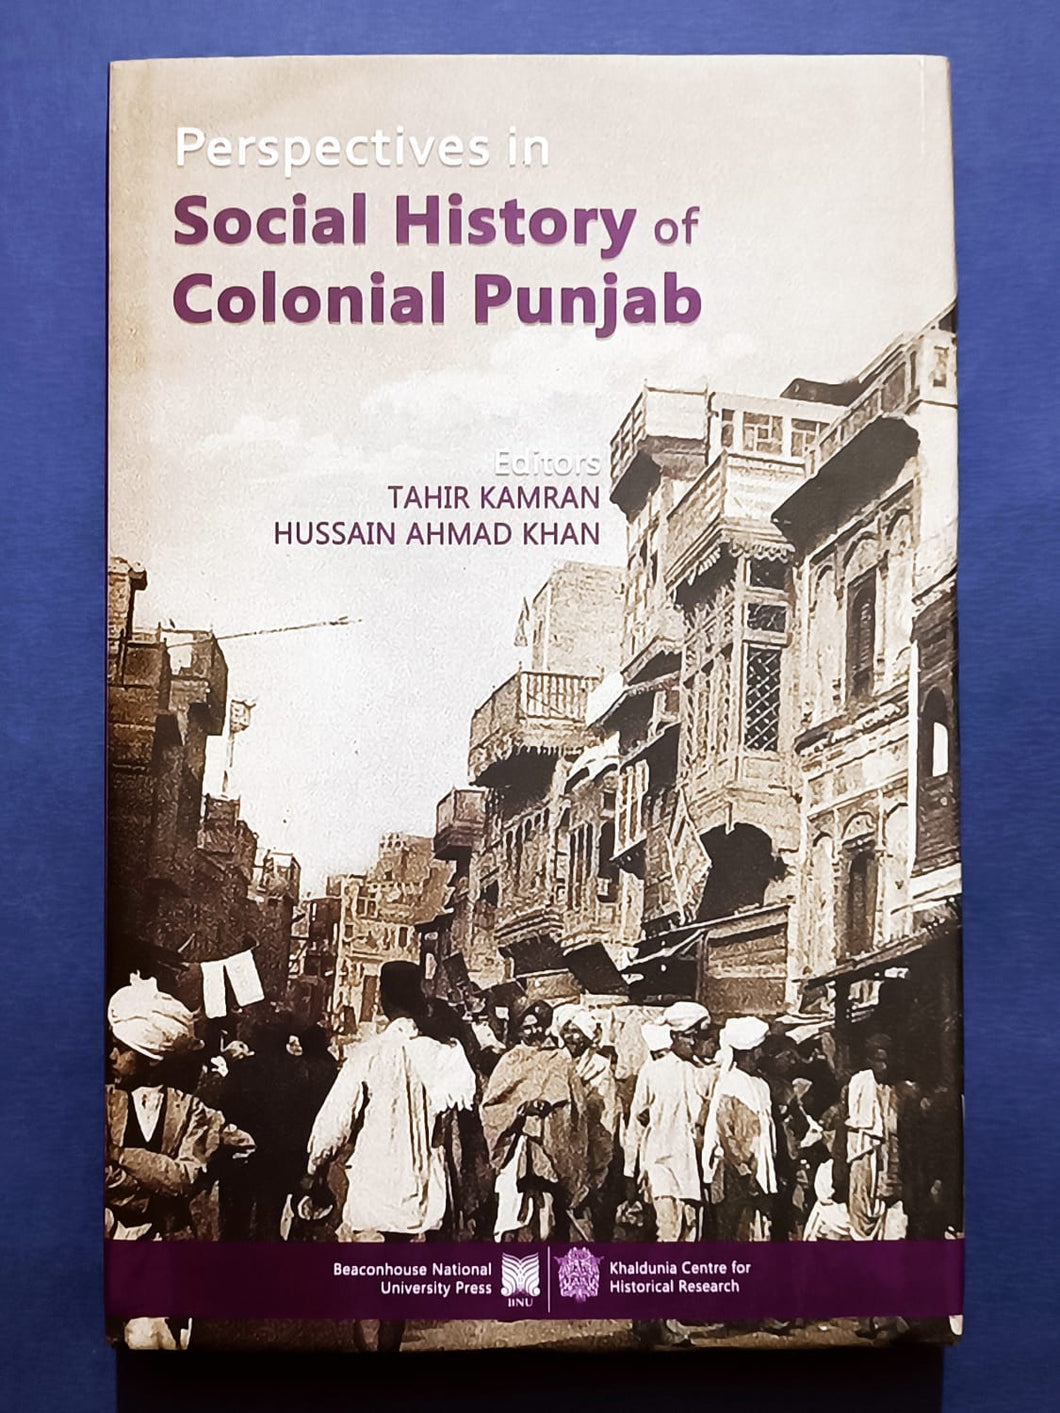 Perspectives in Social History of Colonial Punjab